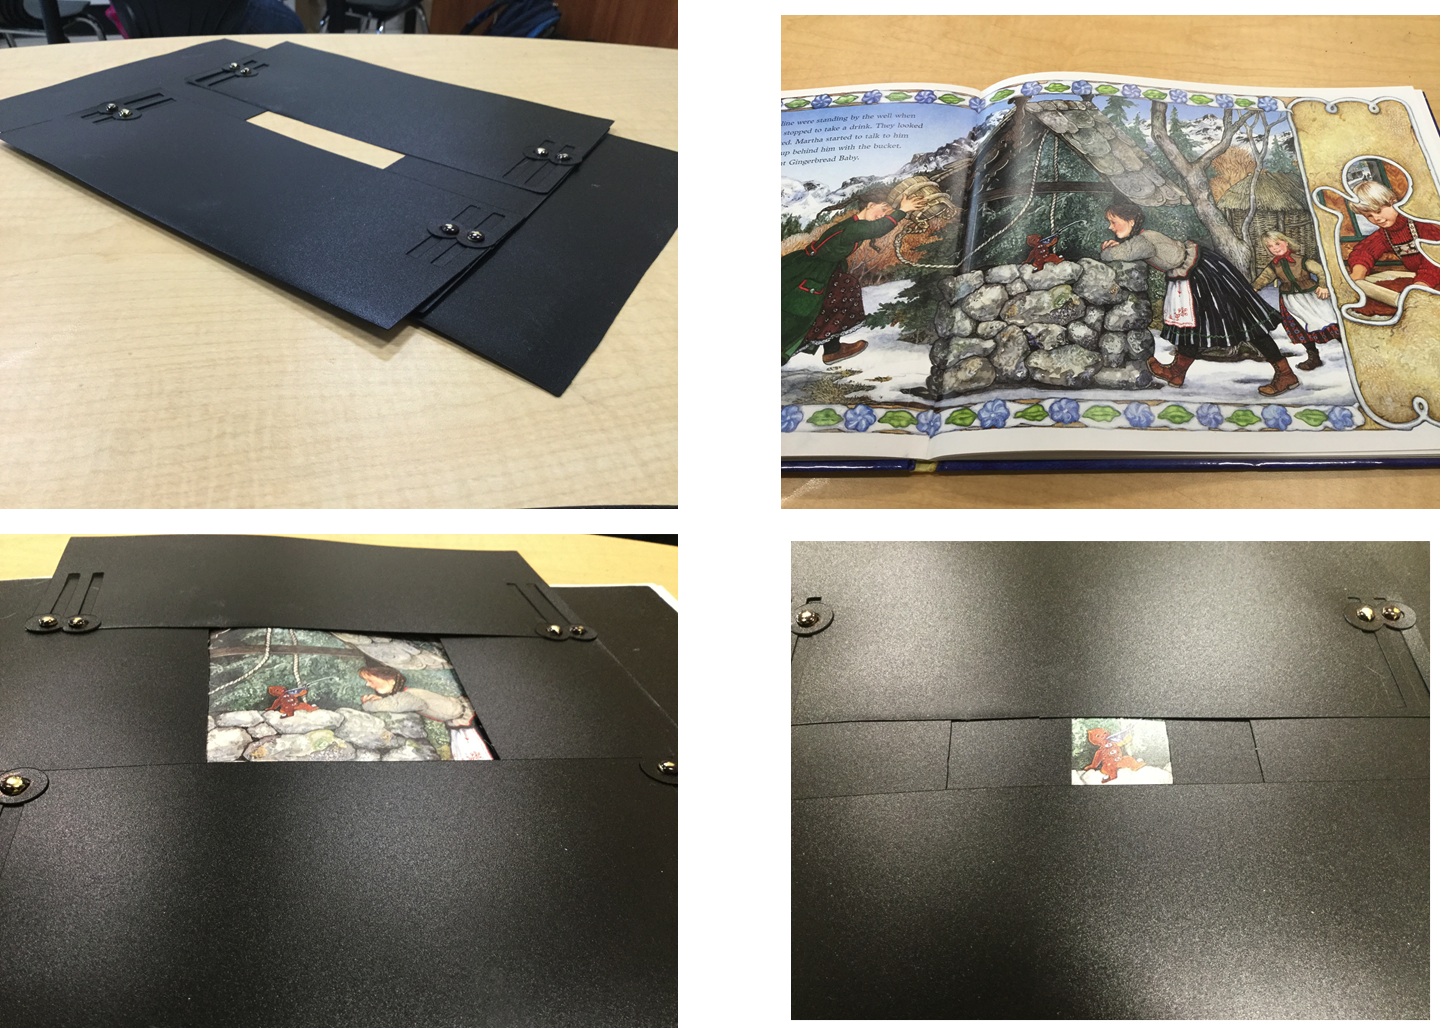 4 images: plain occluder, busy picture book, occluder with large opening, occluder with small opening